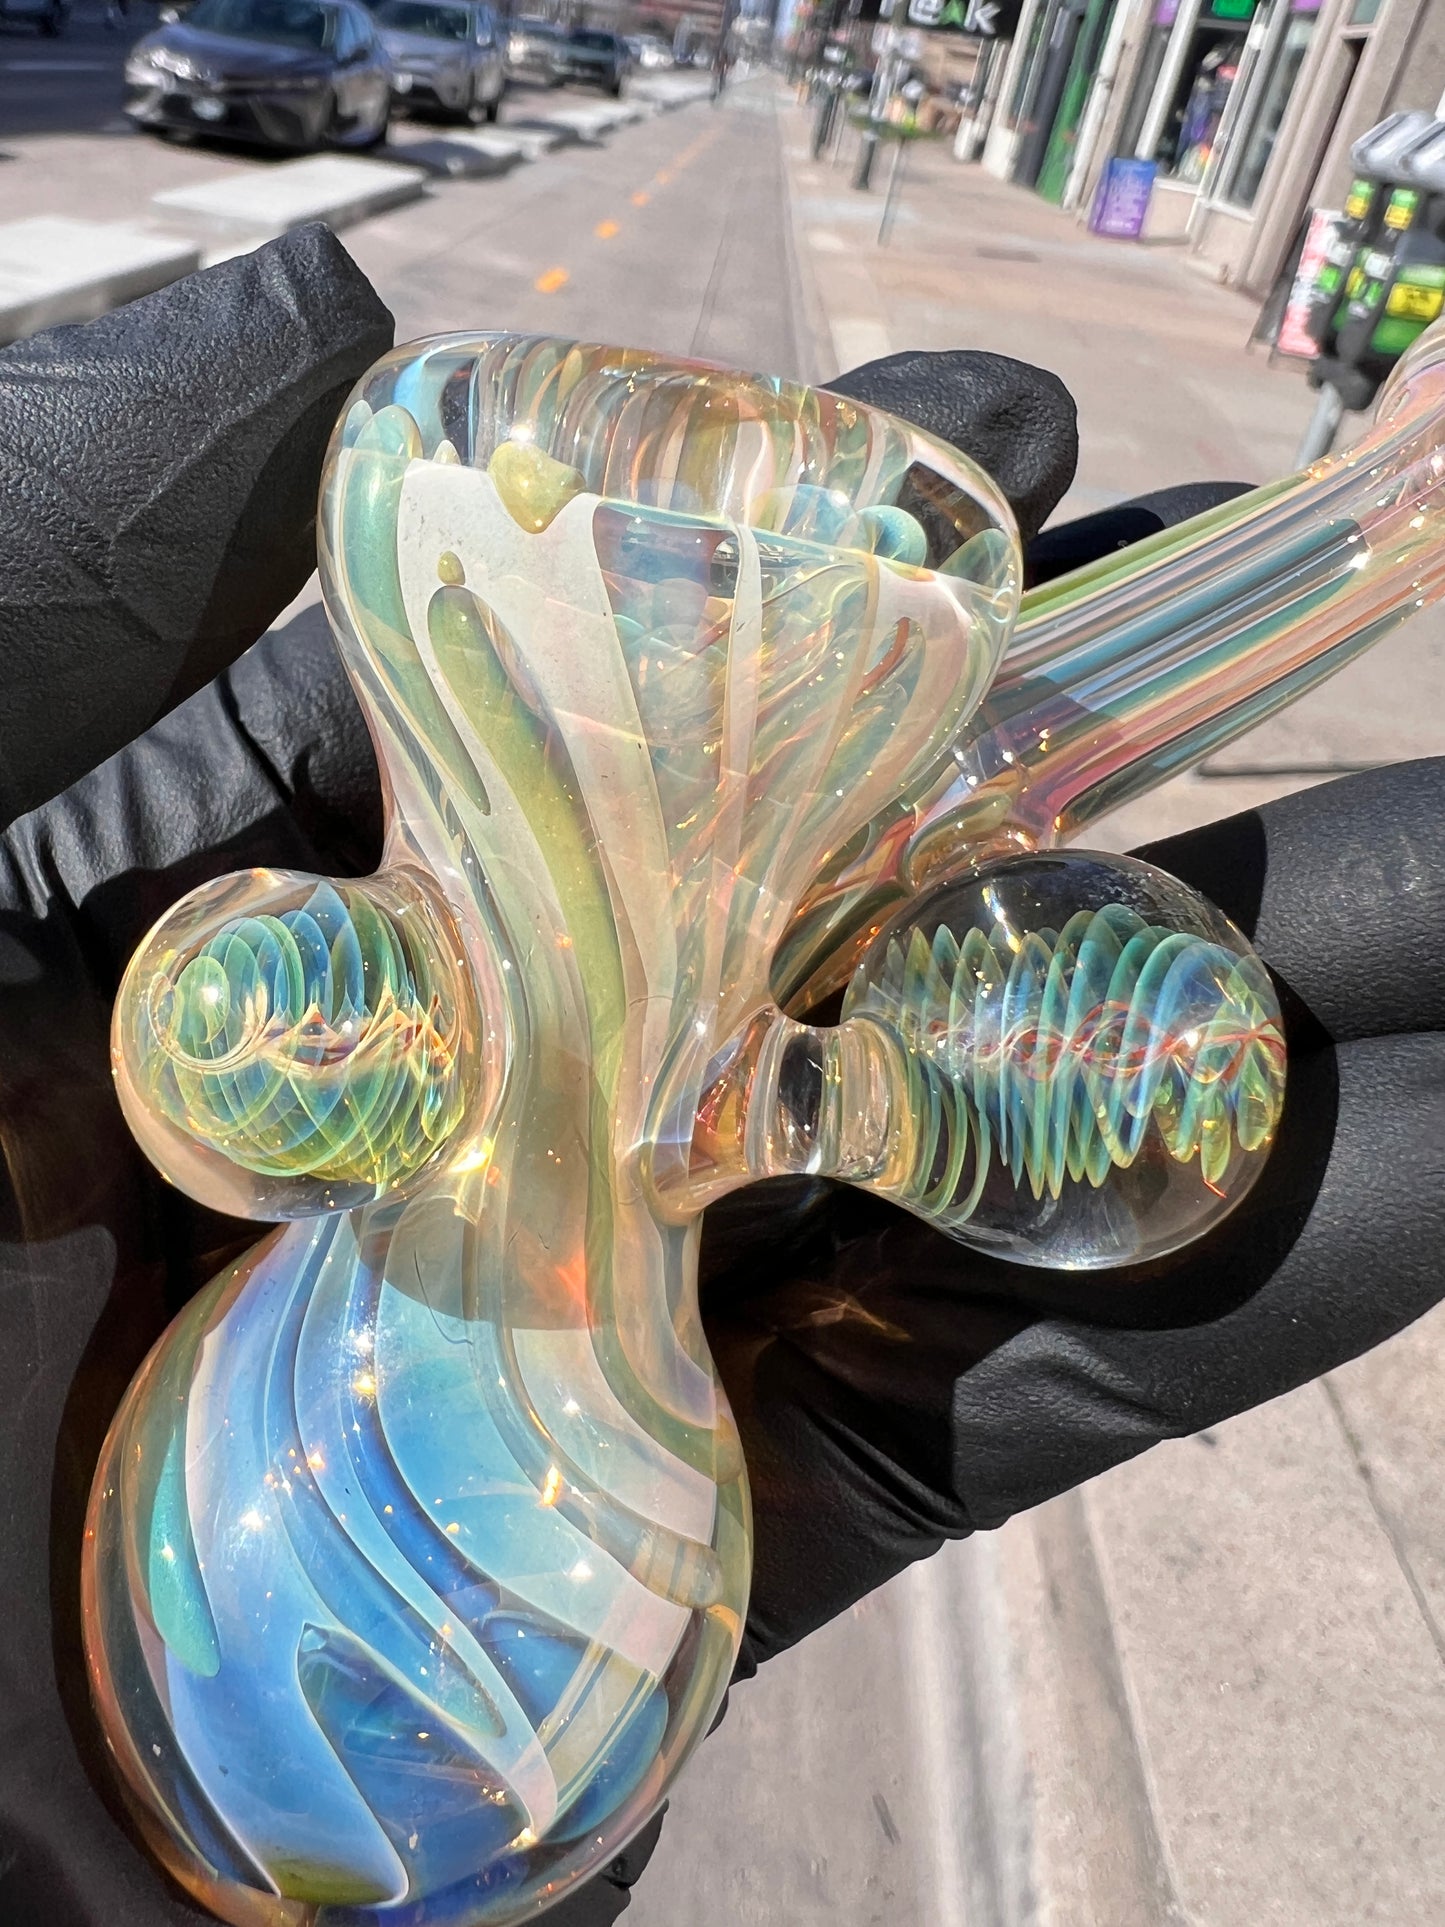 Fumed Sidecar Hammer with Mibs by Simon (Sigh Glass)